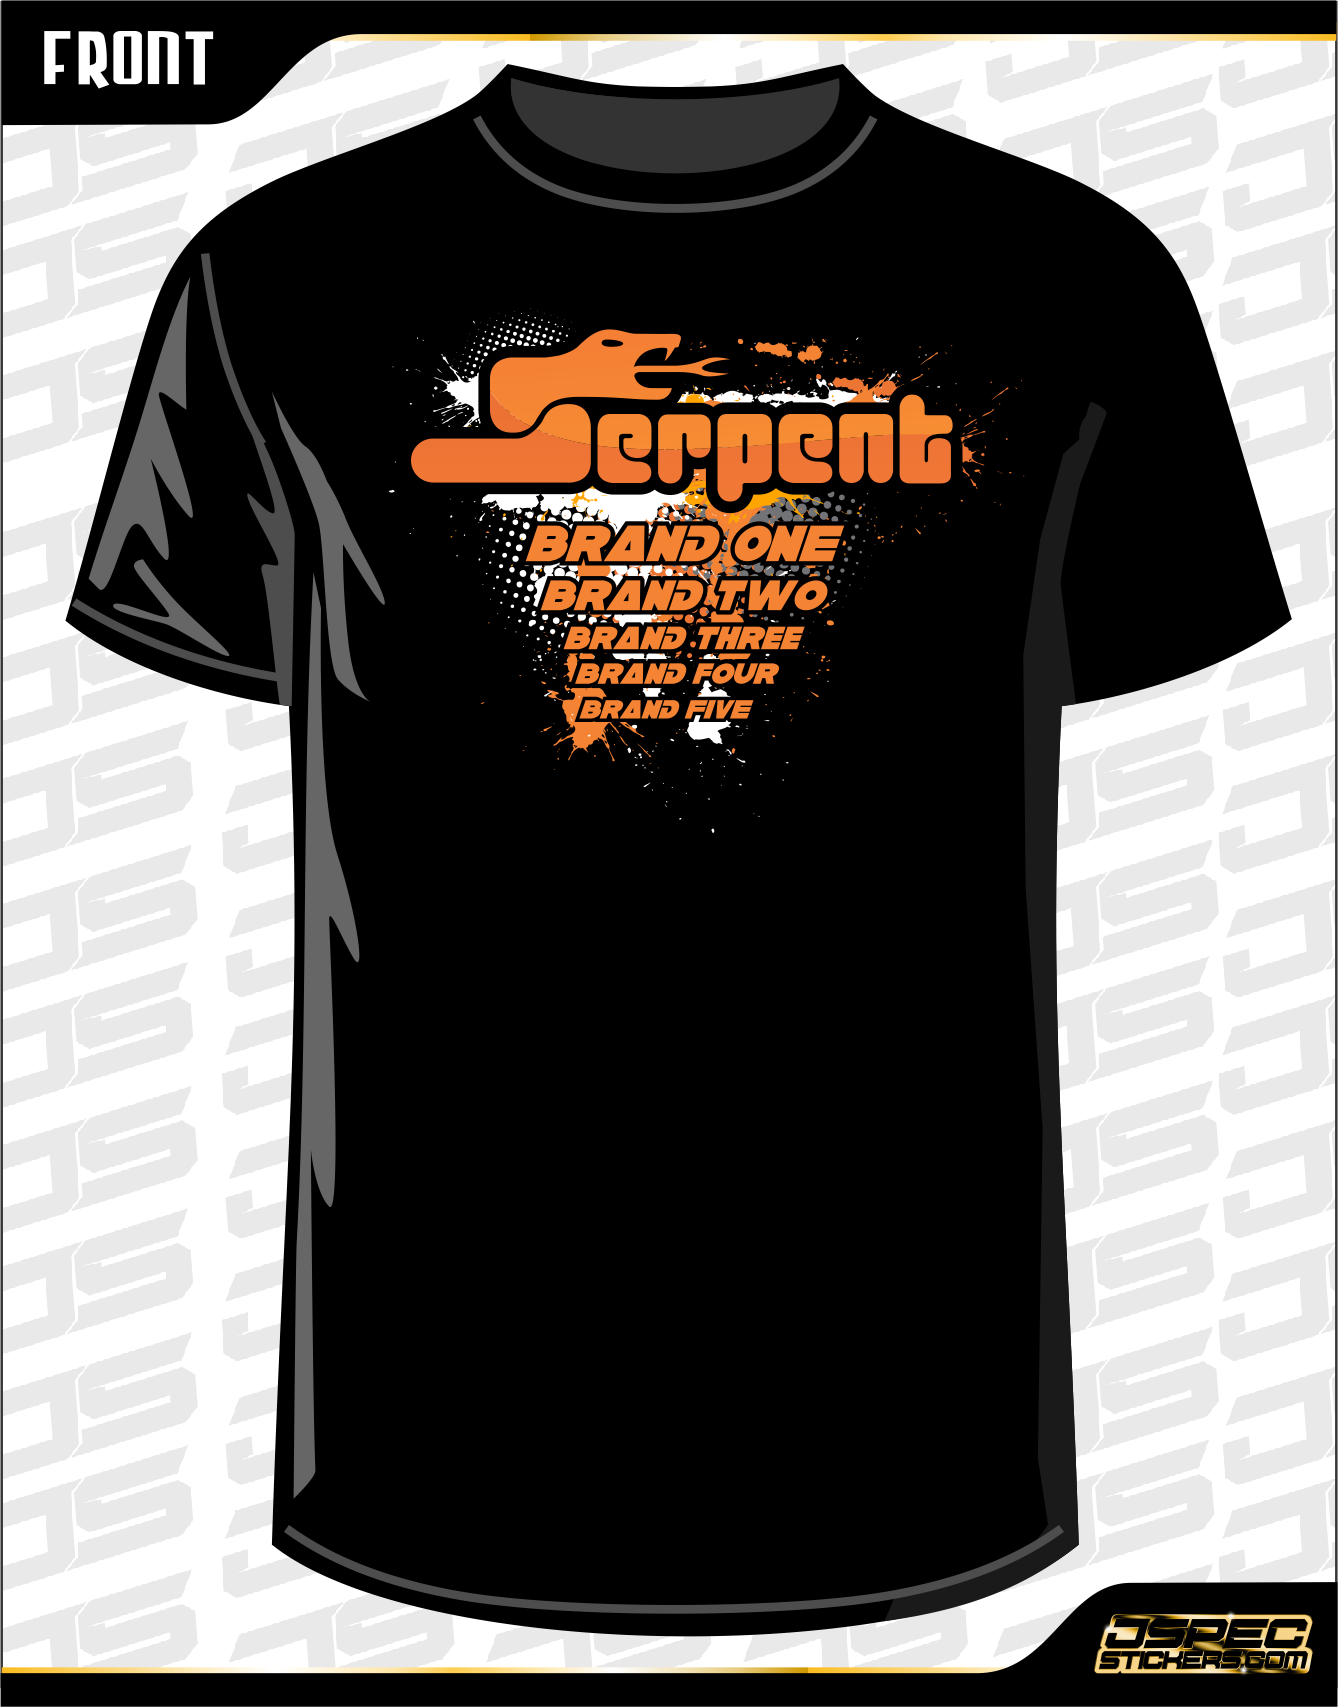 SERPENT RC Shirt with Sponsors